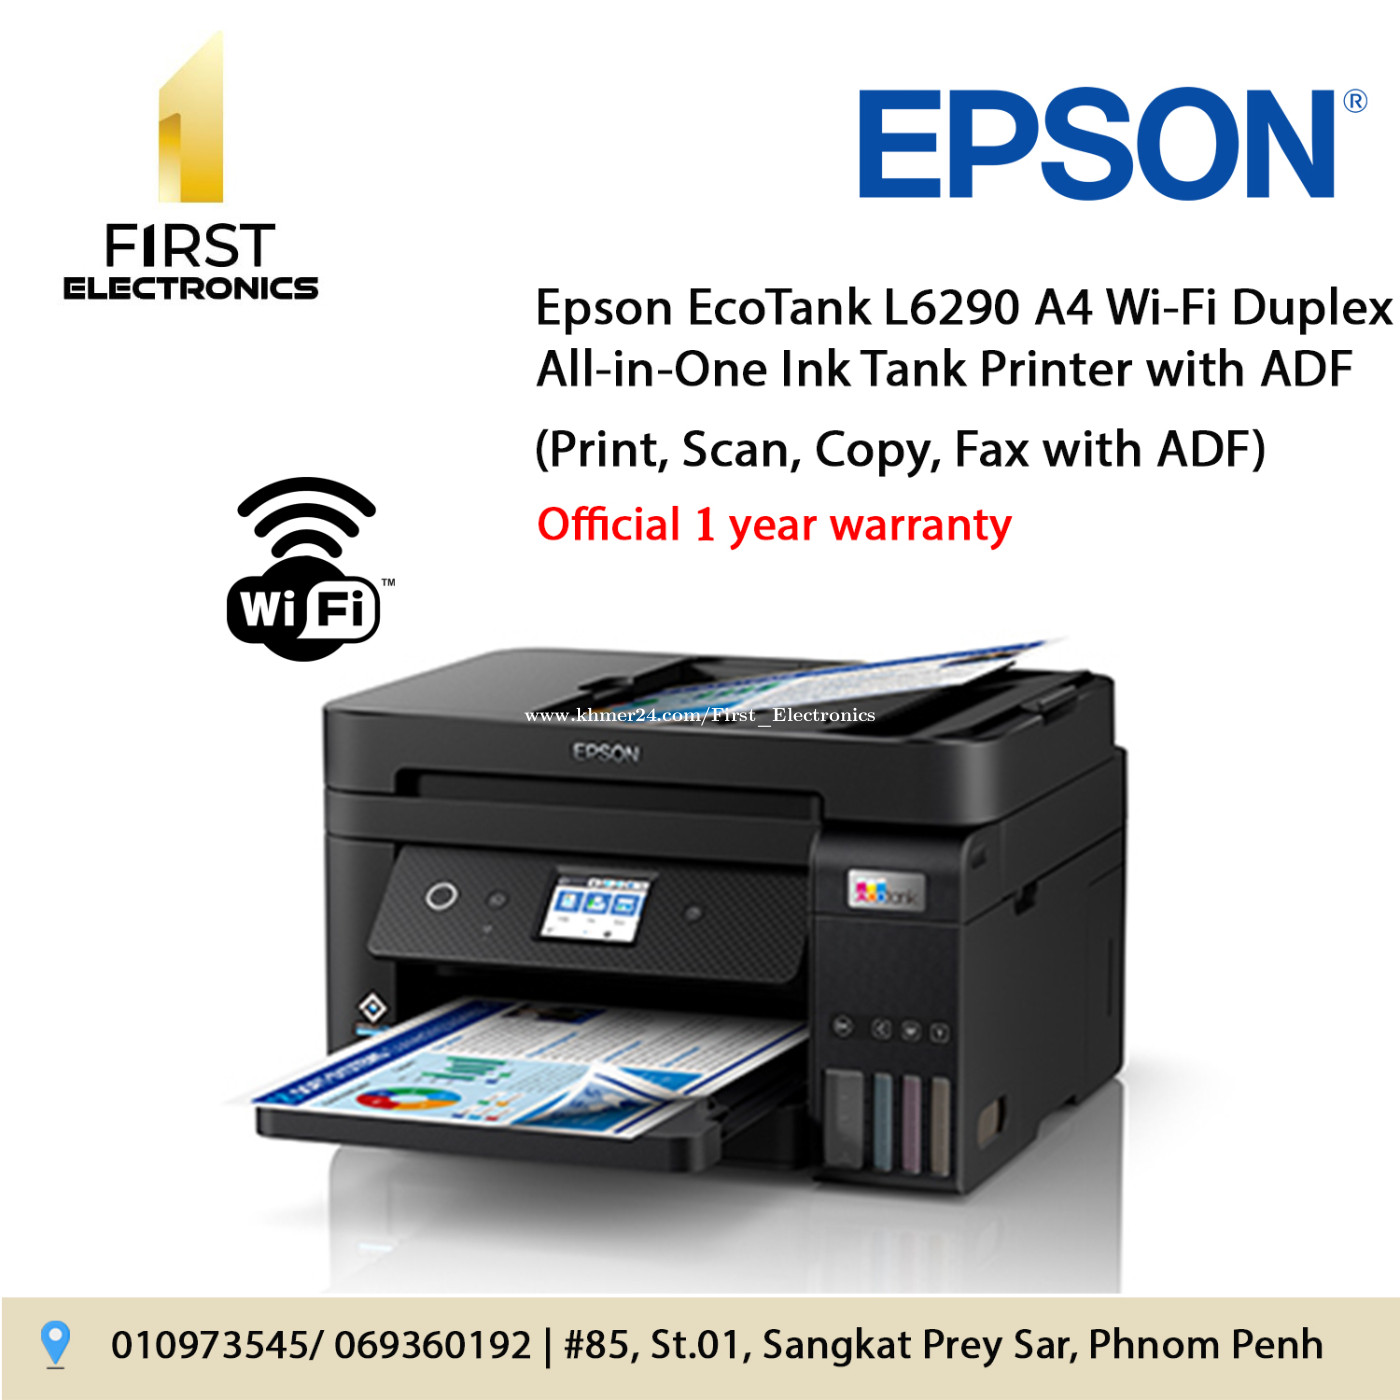 Epson Ecotank L6290 A4 Wi Fi Duplex All In One Ink Tank Printer With Adf Price 35500 In Prey 7842